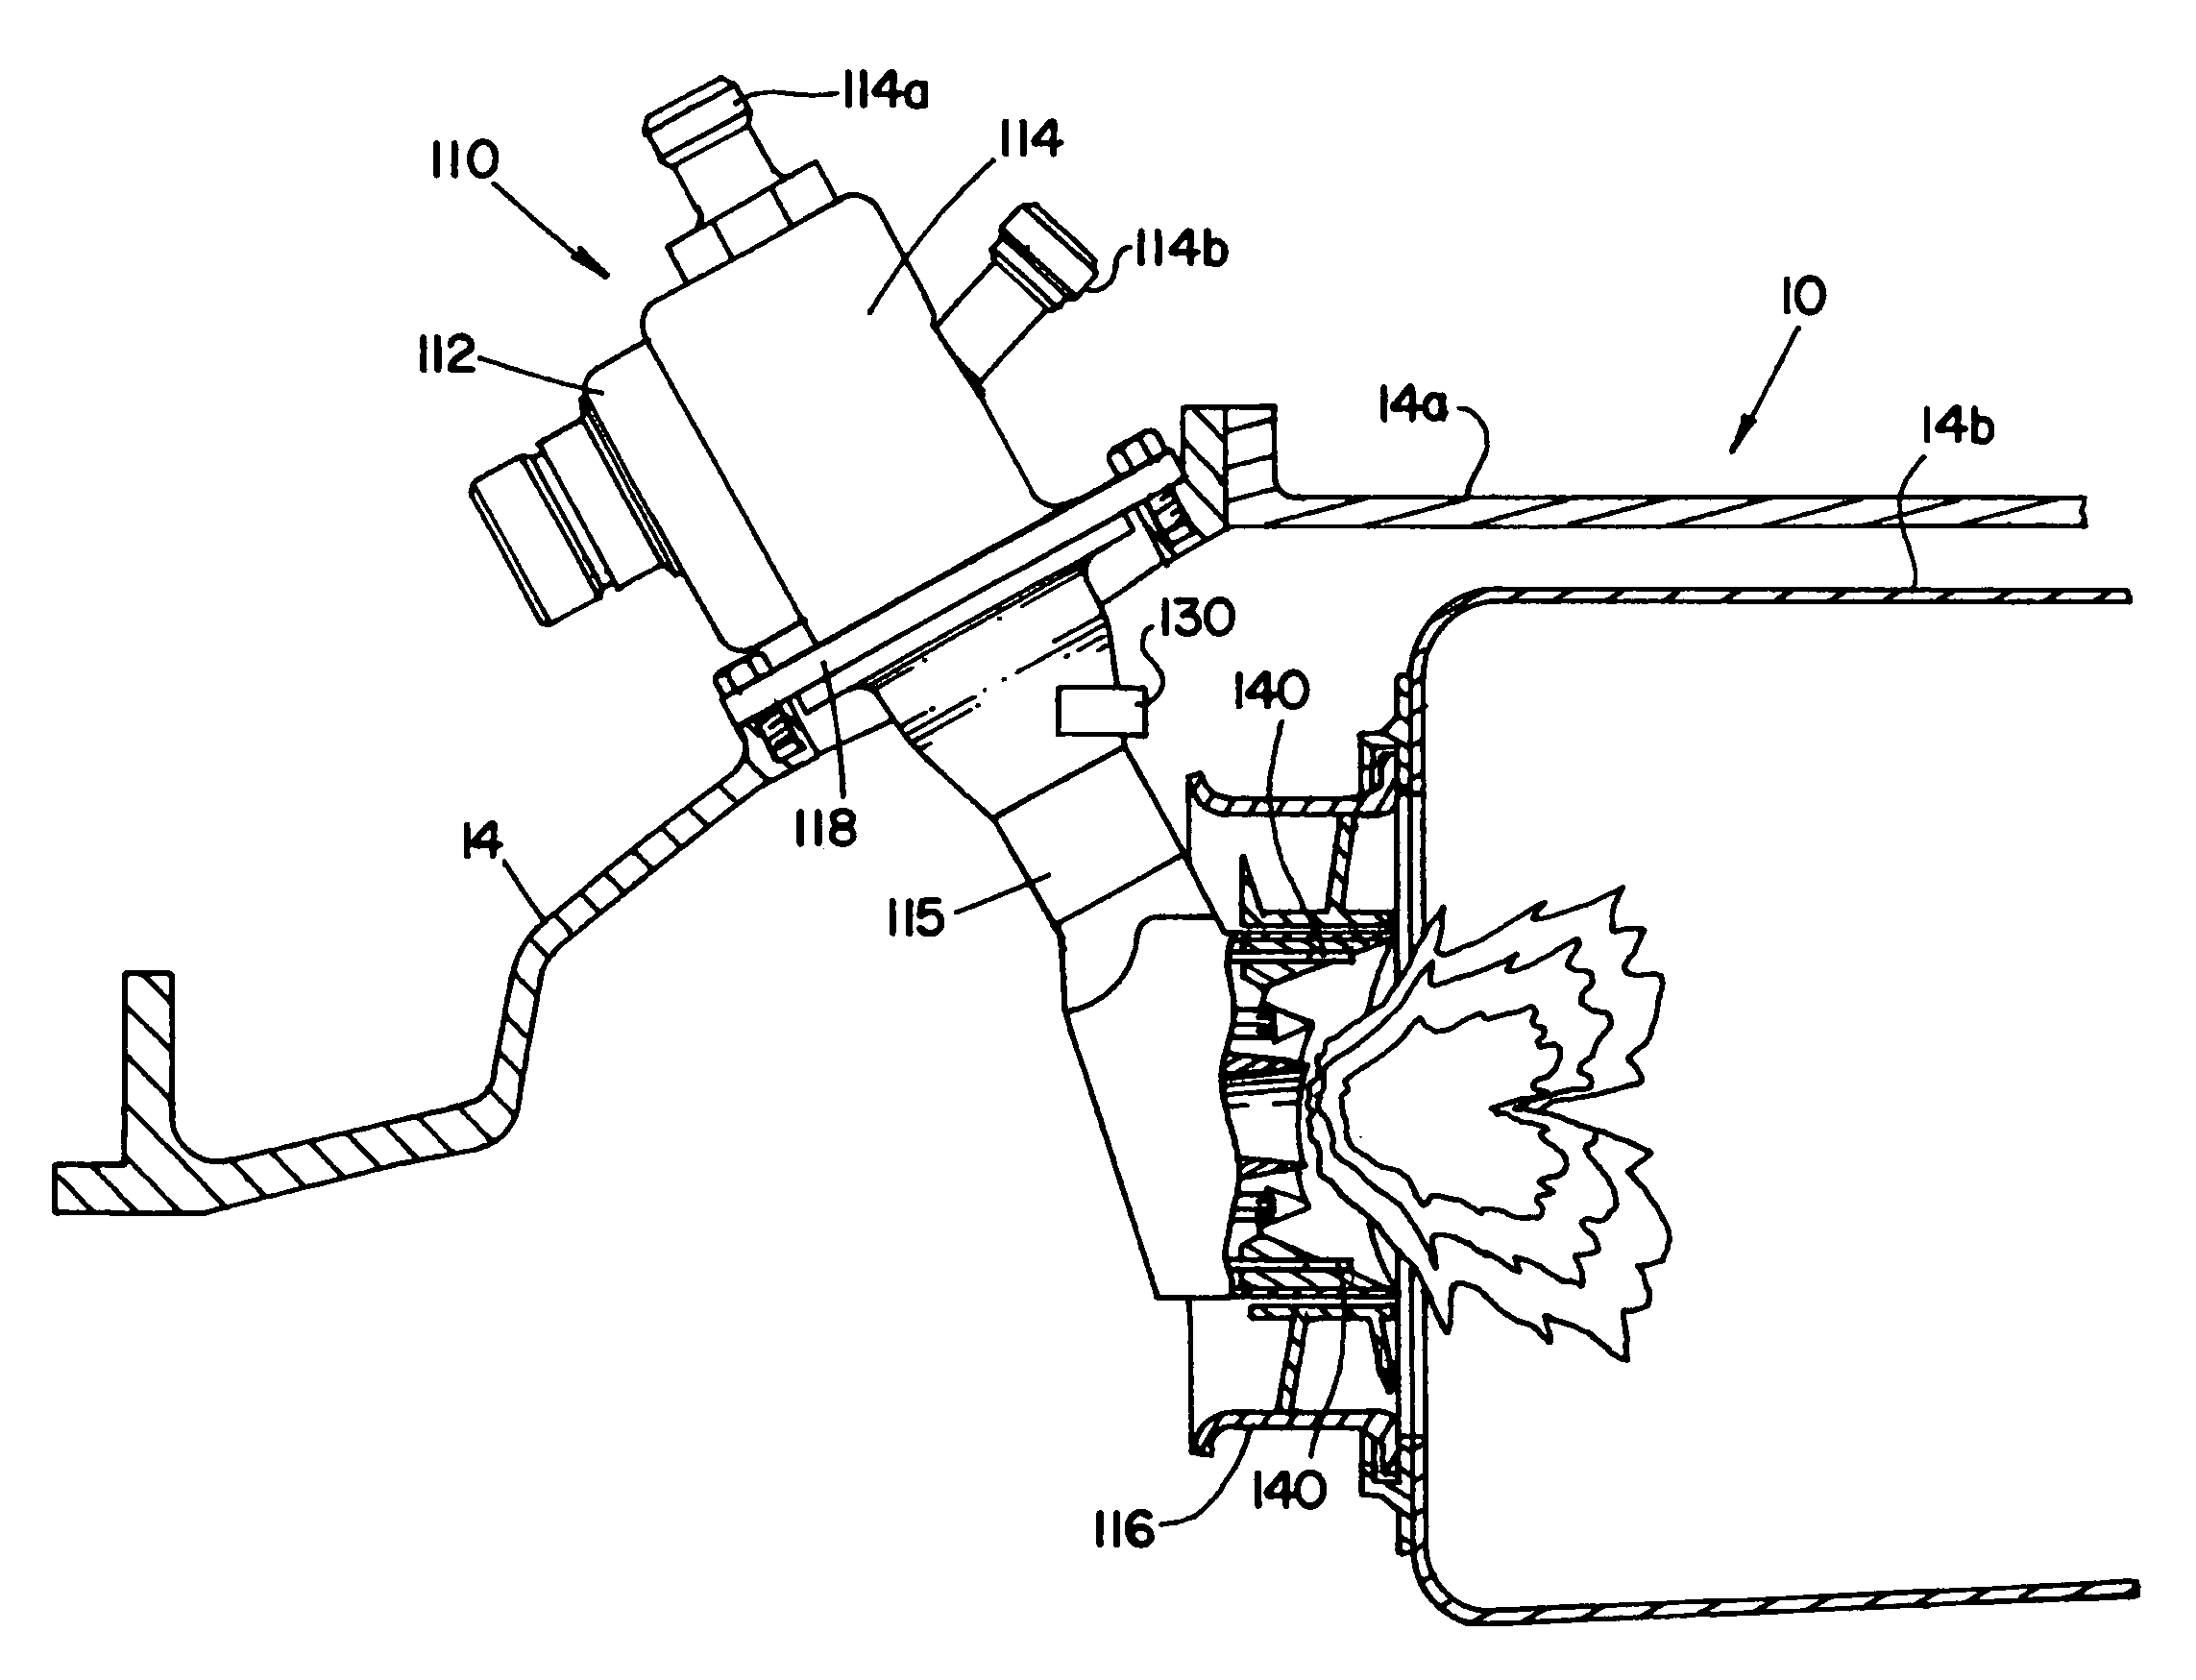 Active combustion control system for gas turbine engines